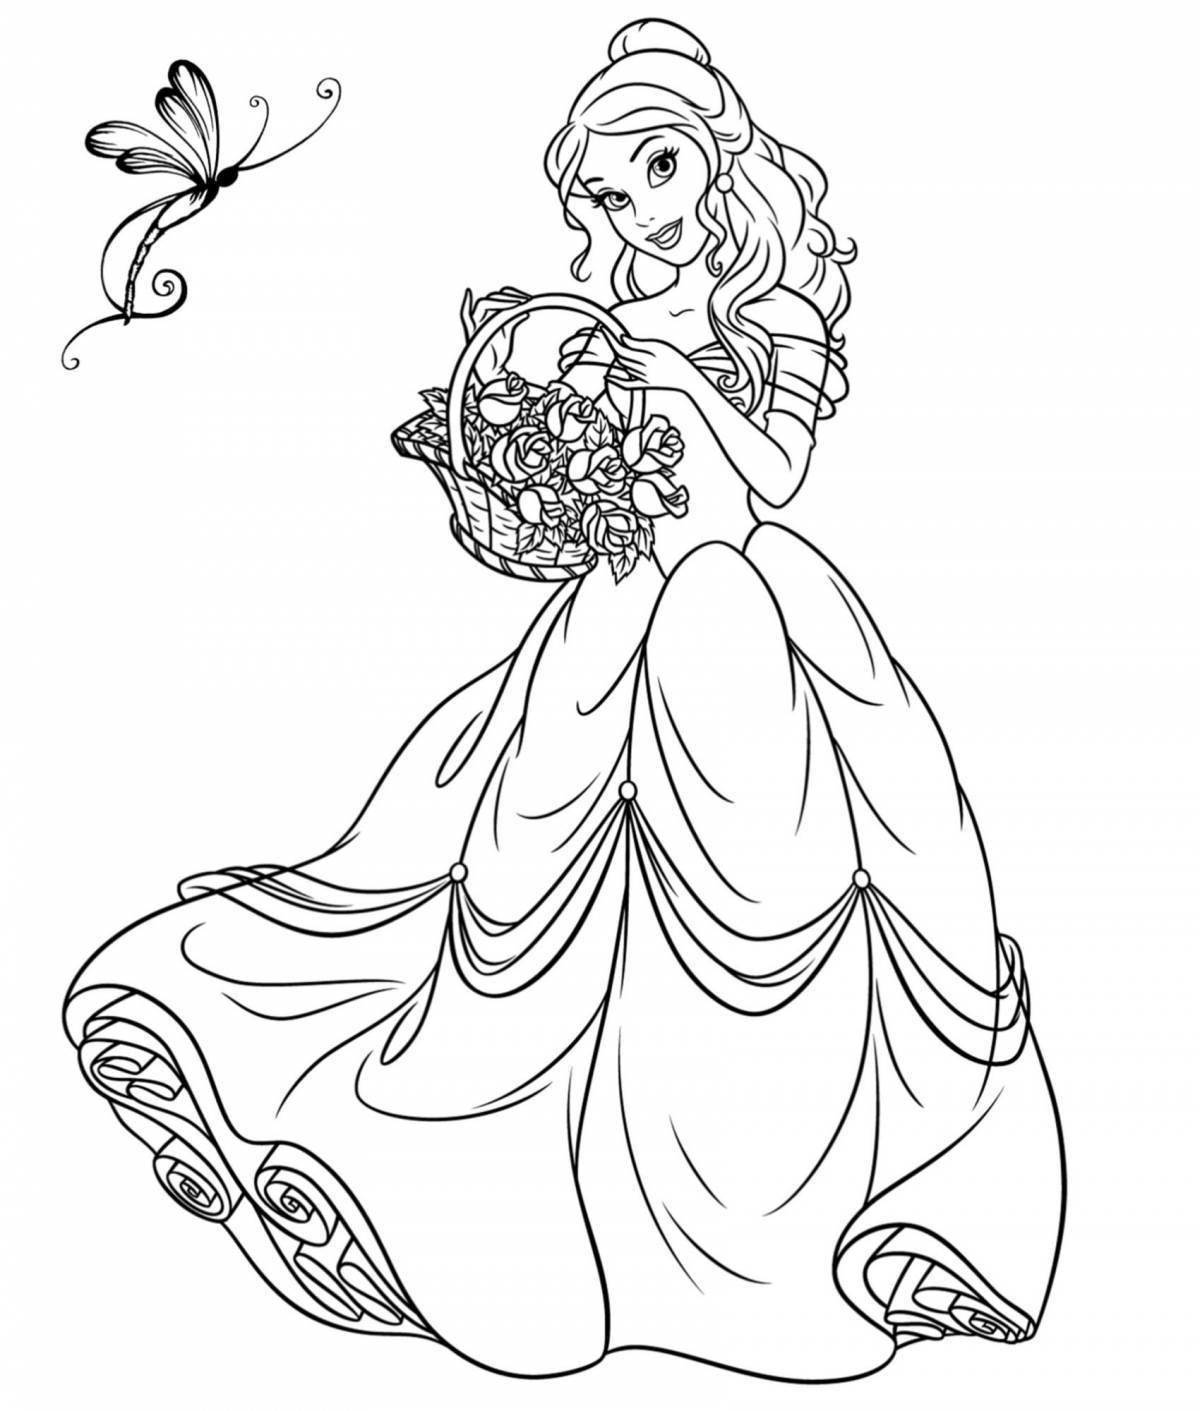 Coloring book shining belle